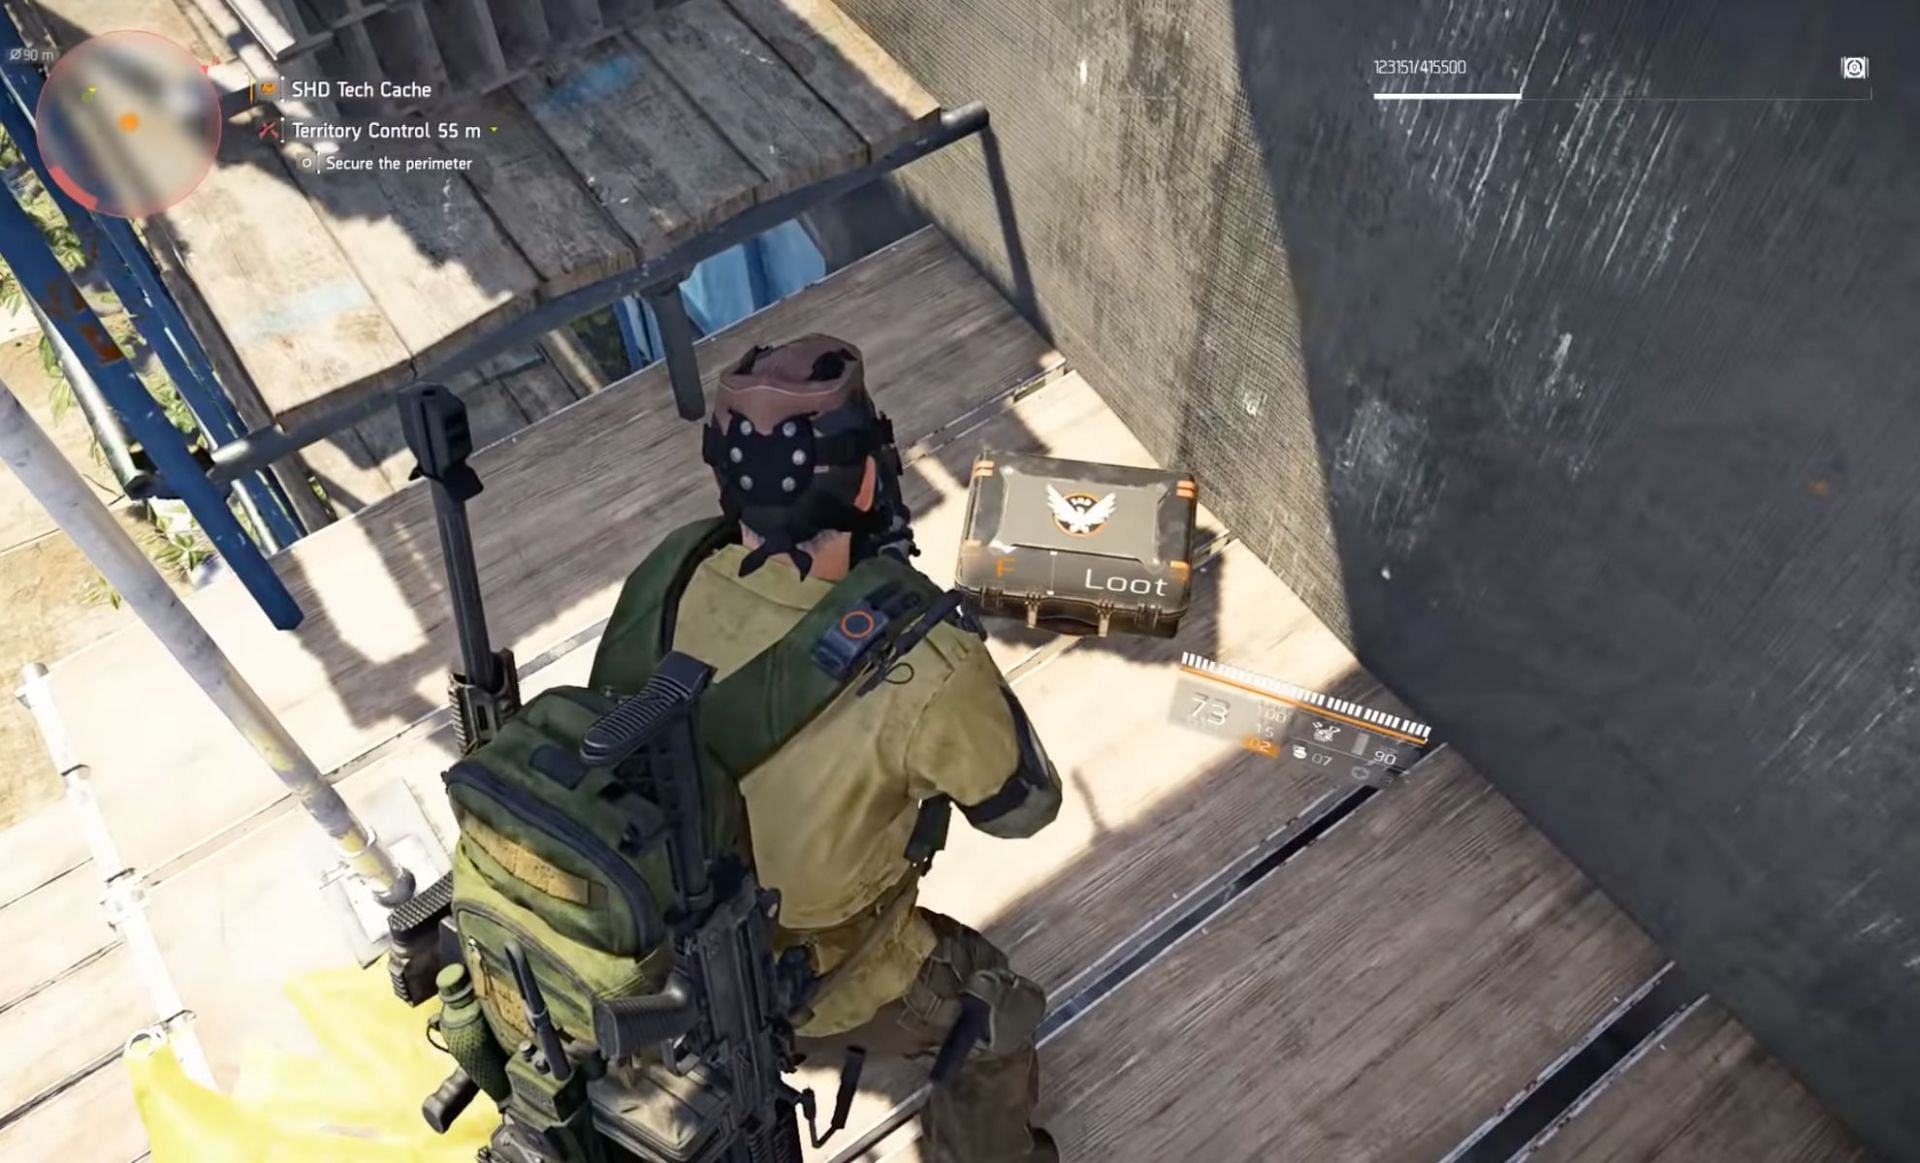 SHD cache in The Division 2 (Image via ZaFrostPet on YouTube)